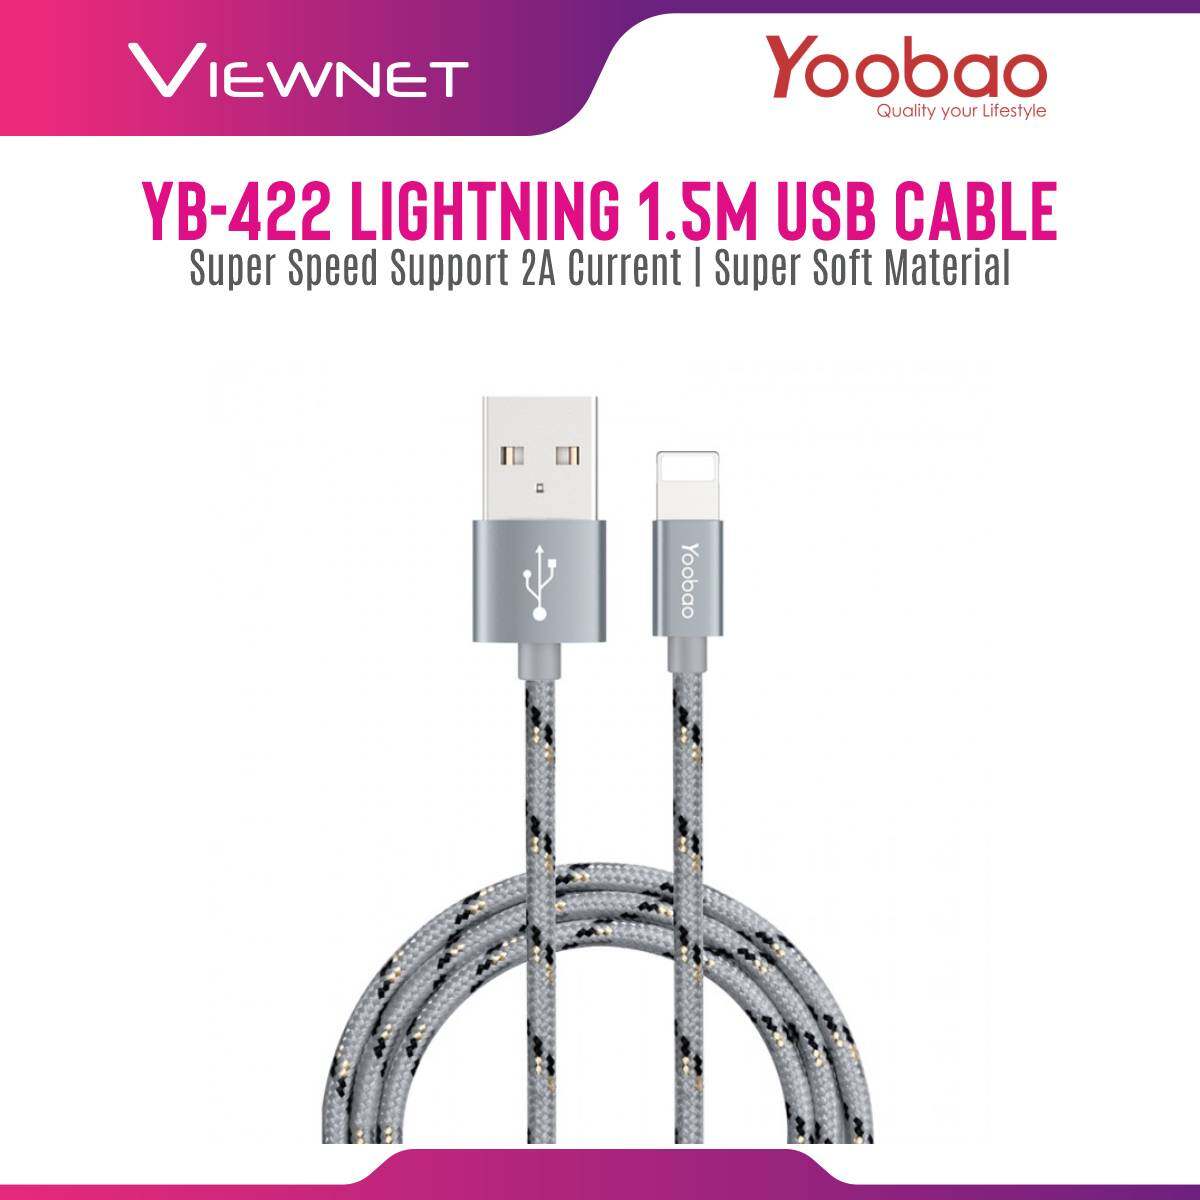 Yoobao YB-422 150cm Nylon Lightning Cable Ribbon Stripe Design Edition With Support 2.1A Fast Charge Fast Charging USB Cable For iPhone